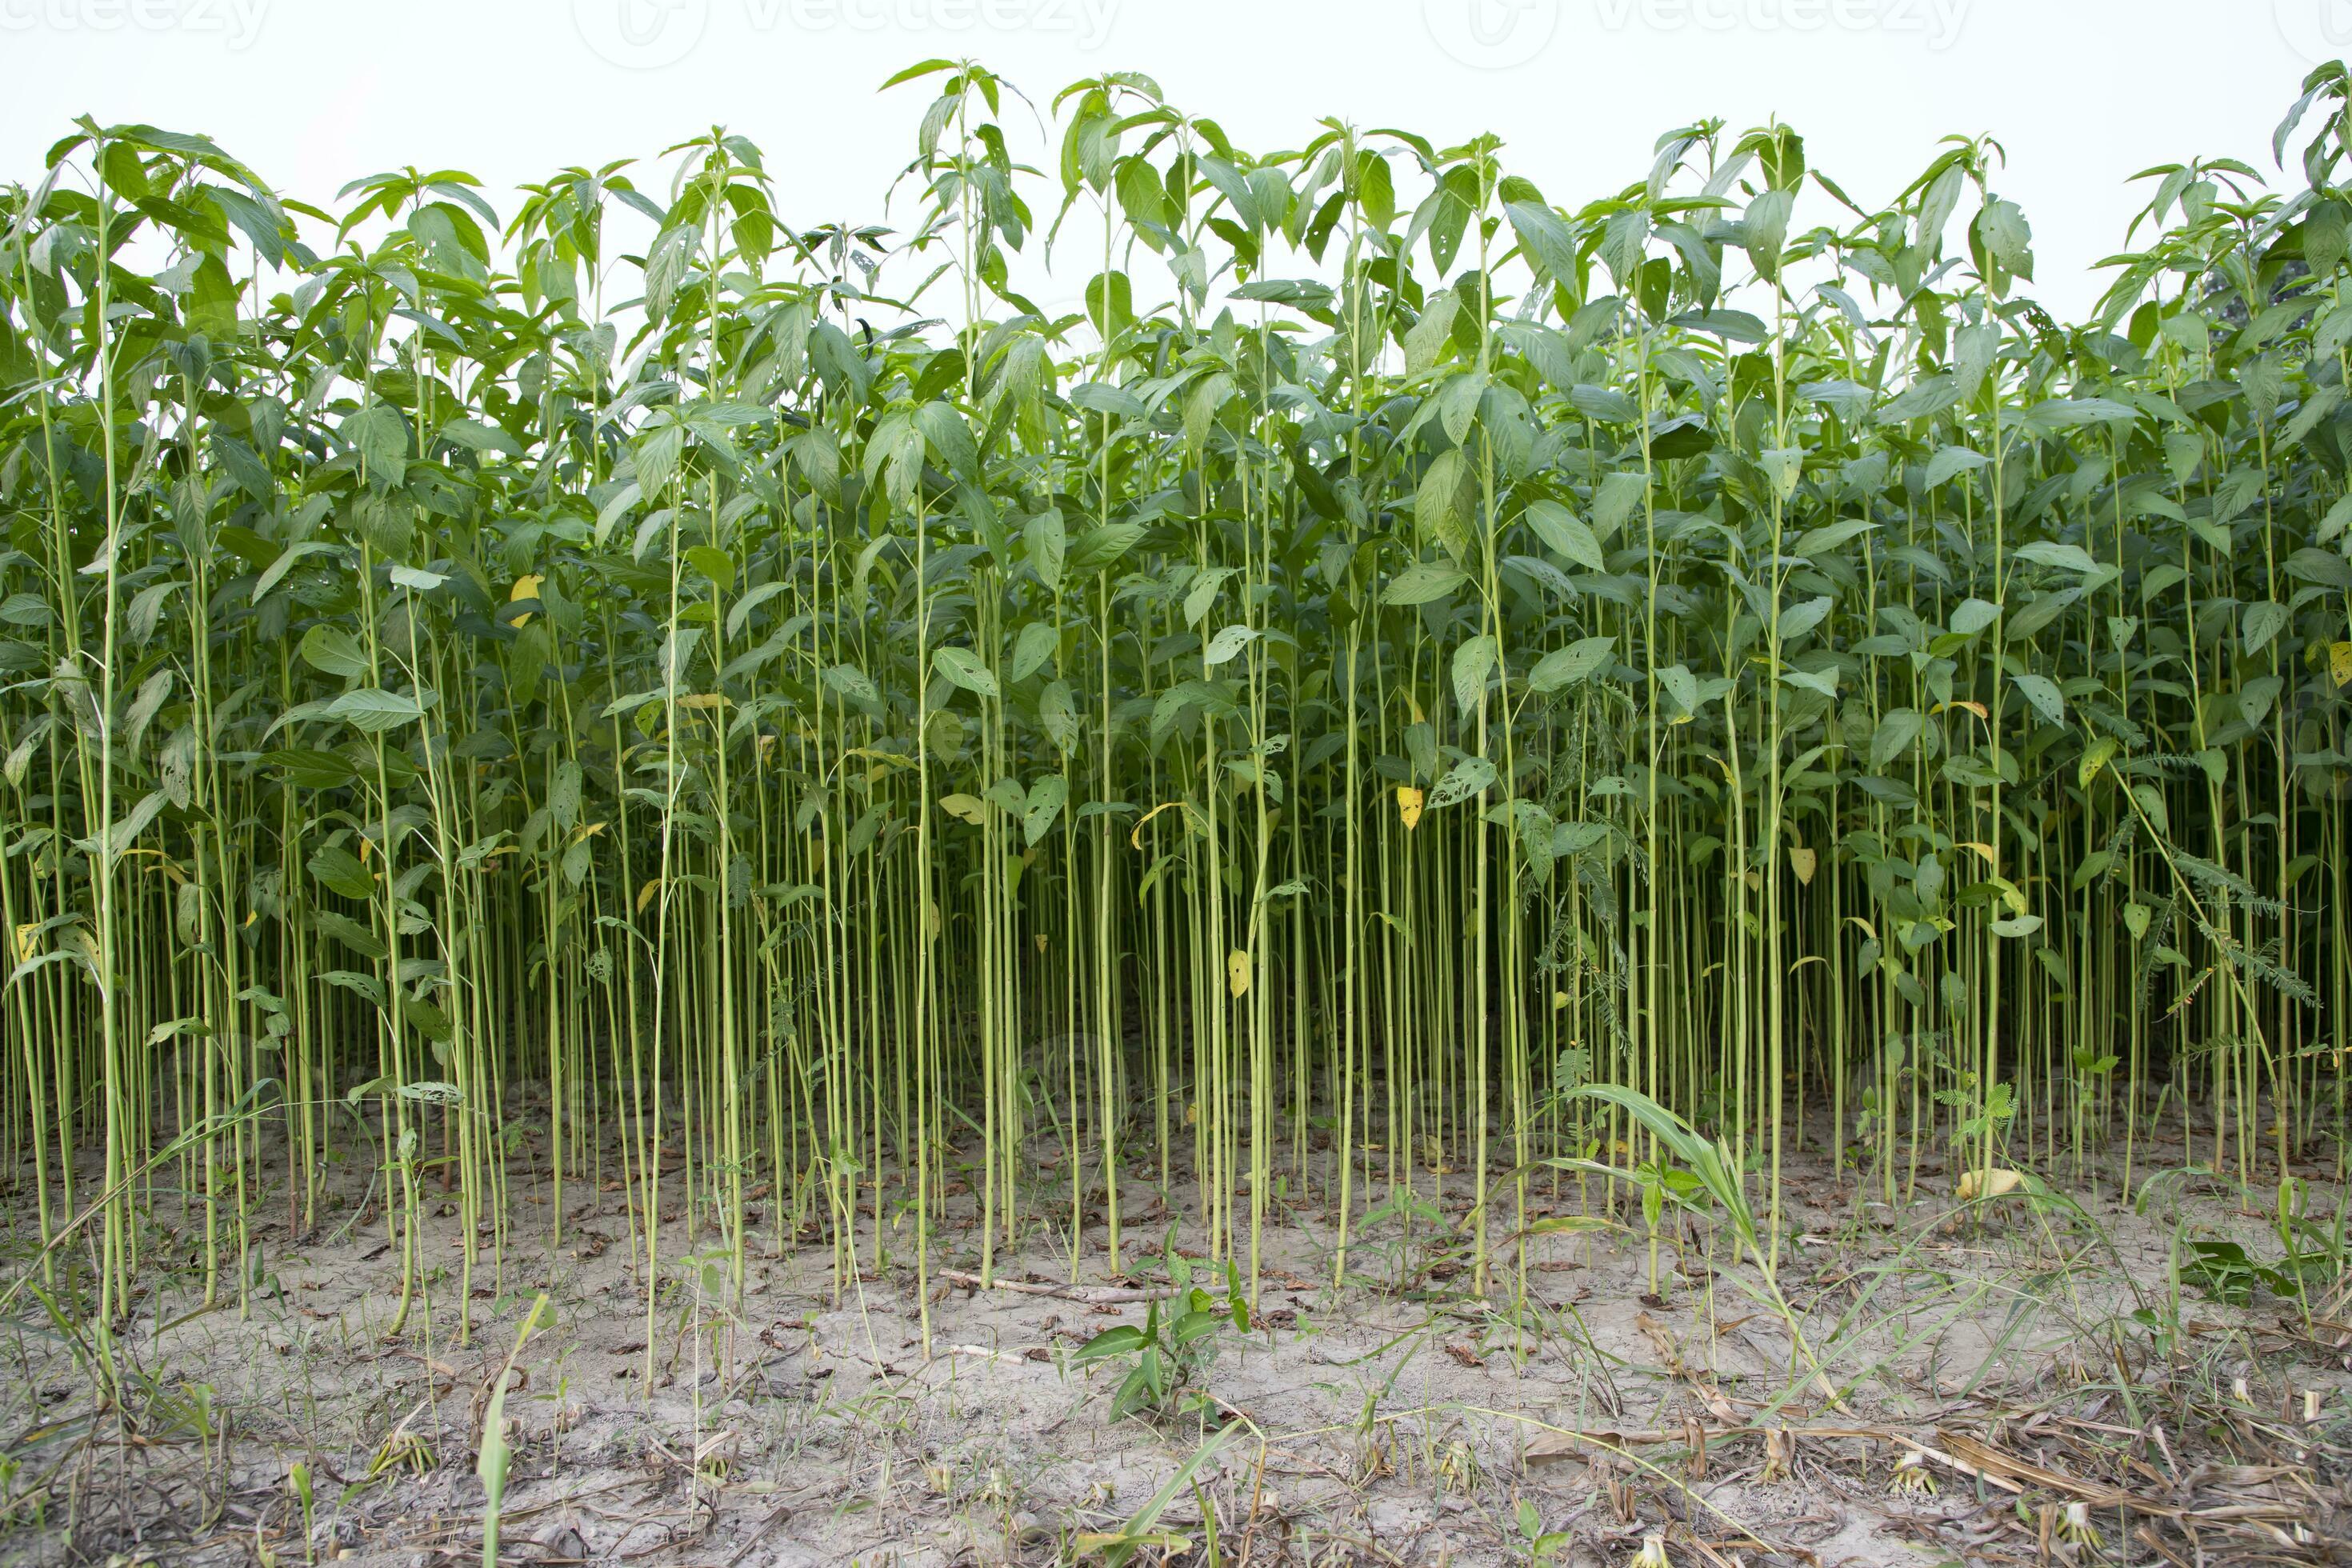 Jute plants growing in a field in the countryside of Bangladesh